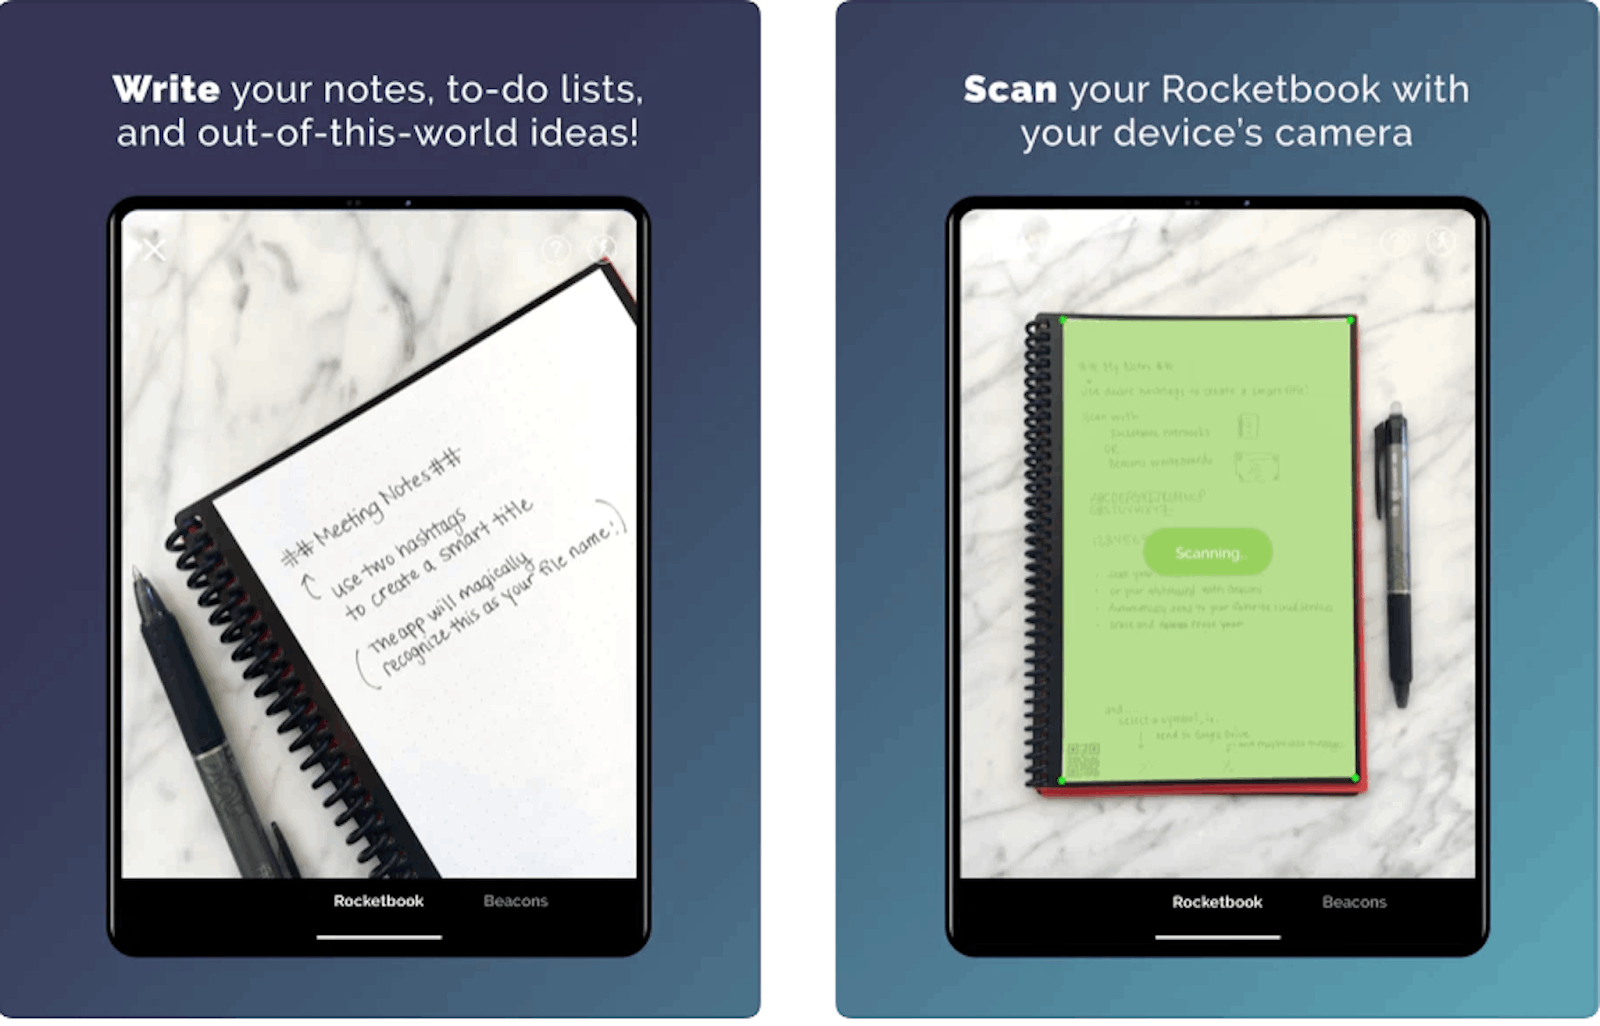 Rocketbook App - Discover How to Use this App